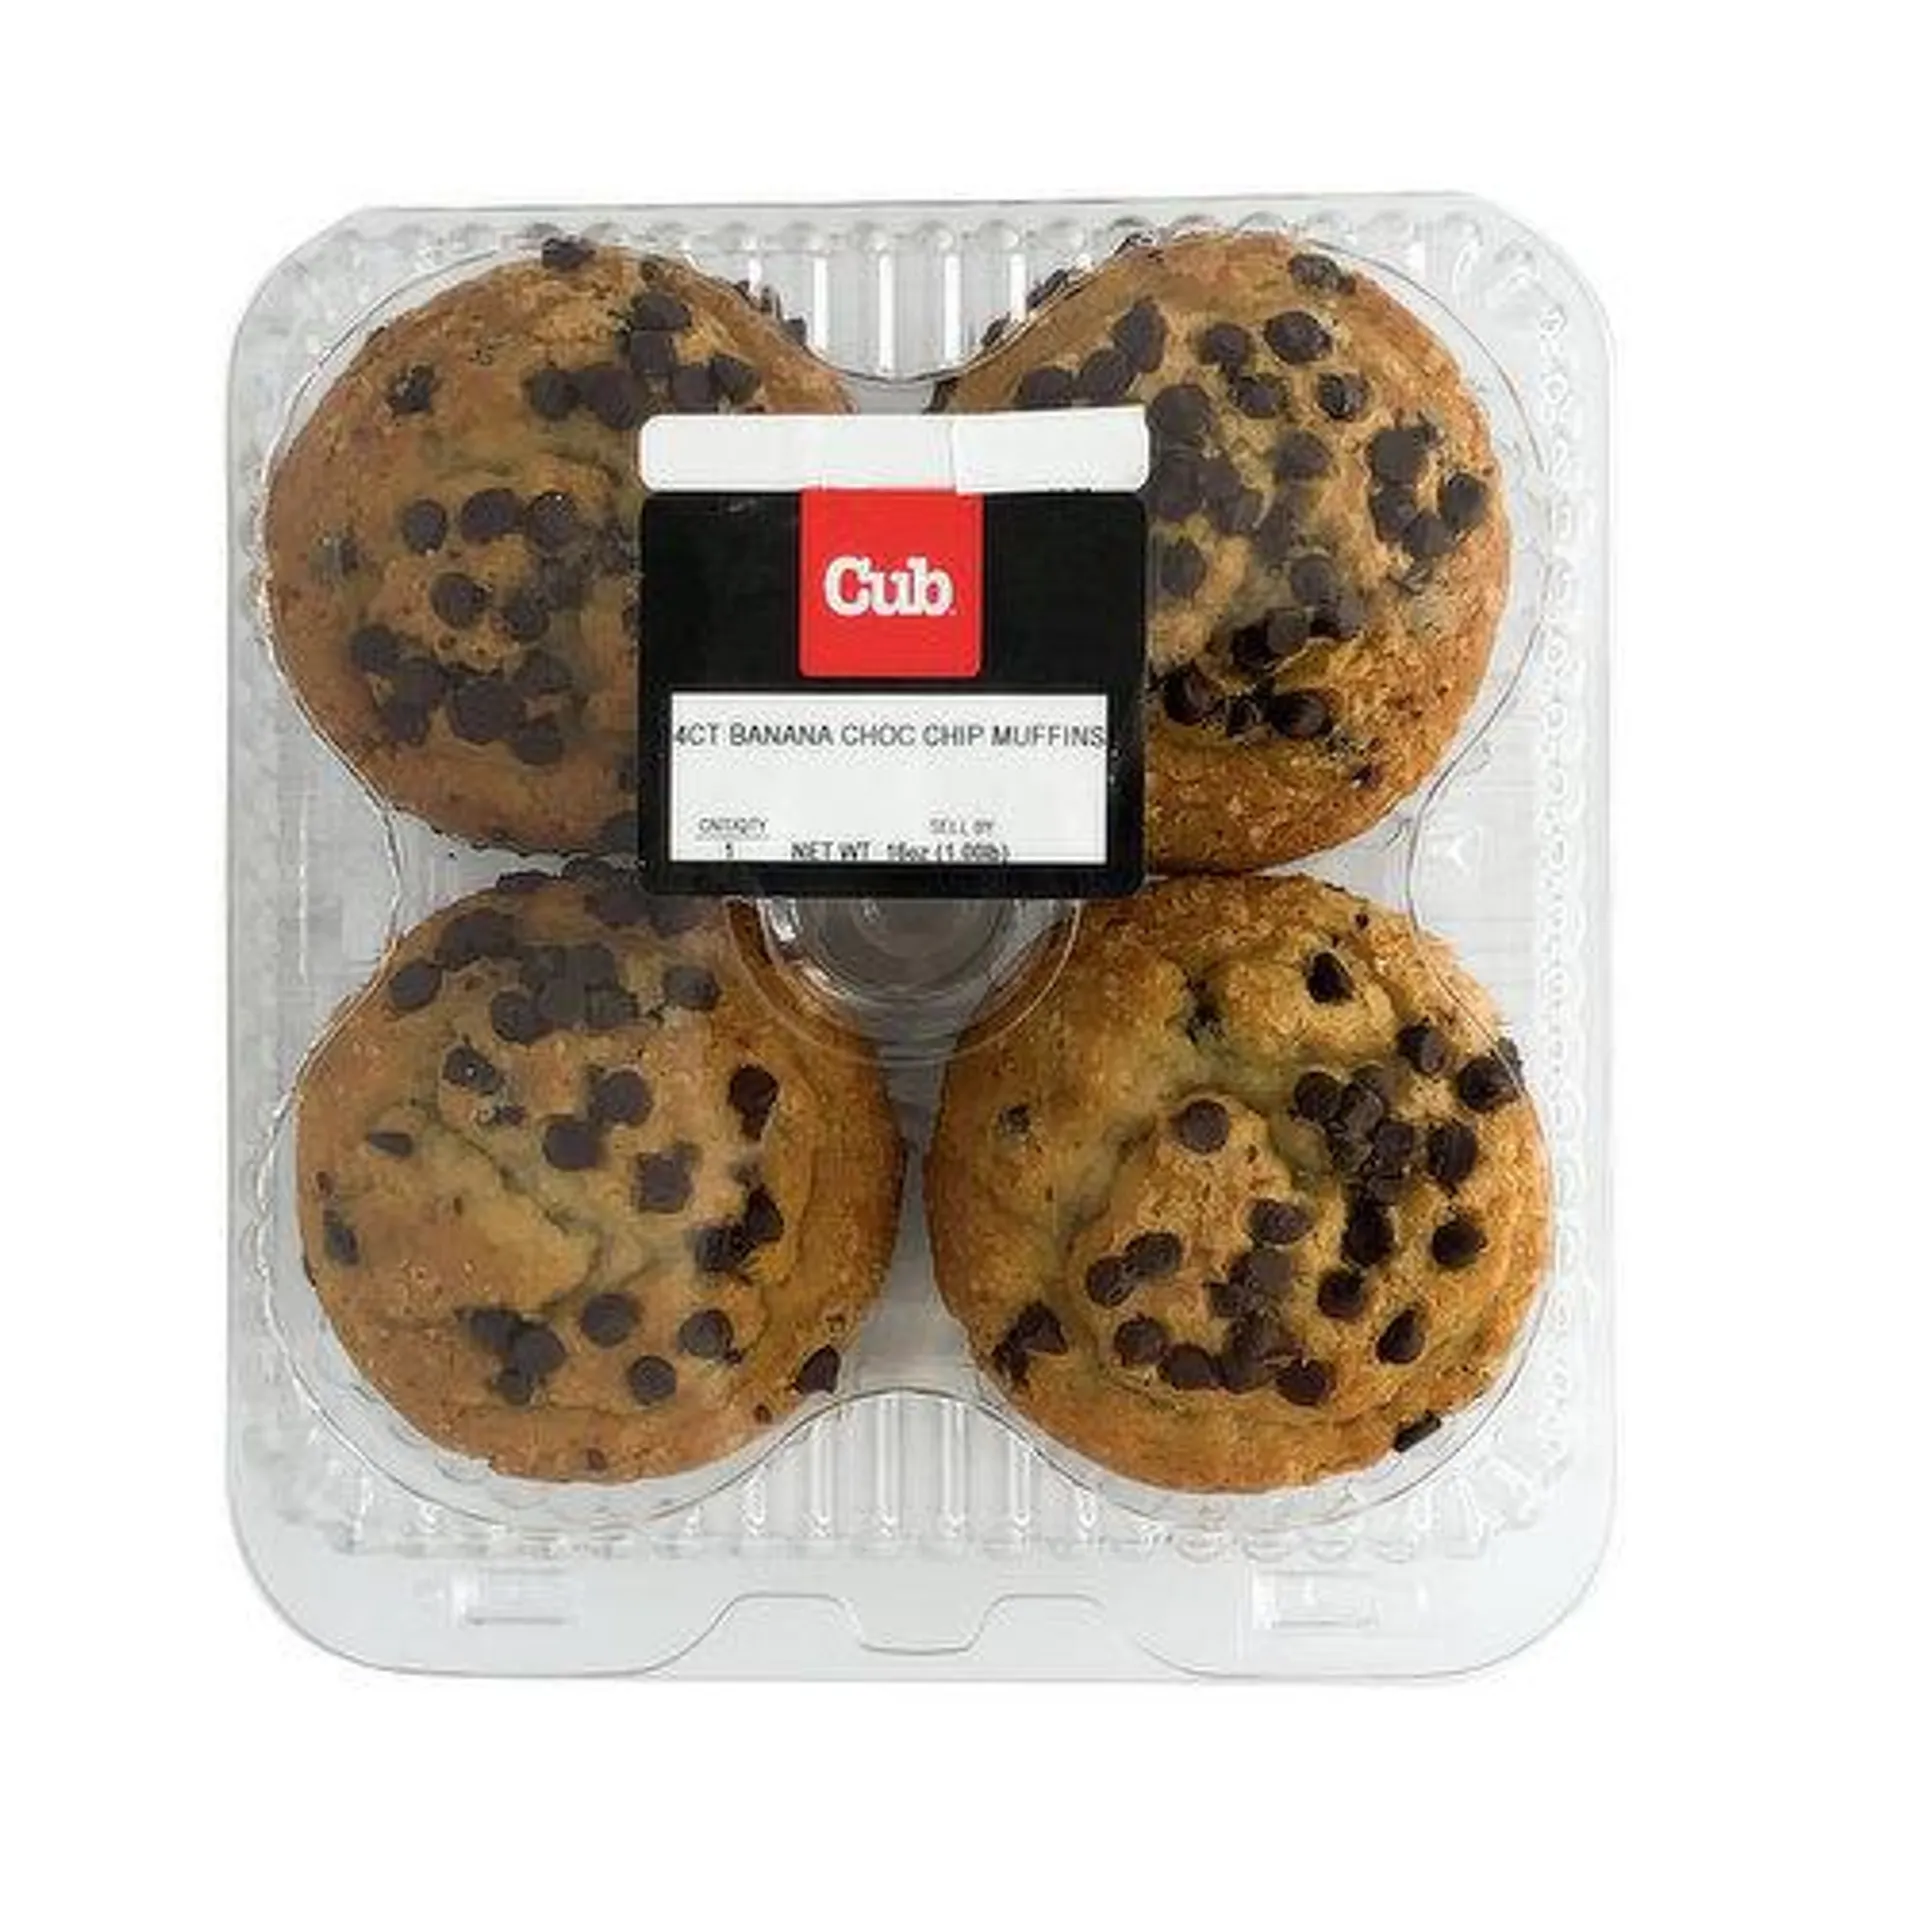 Cub Bakery Banana Chocolate Chip Muffins 4 Count, 1 Each